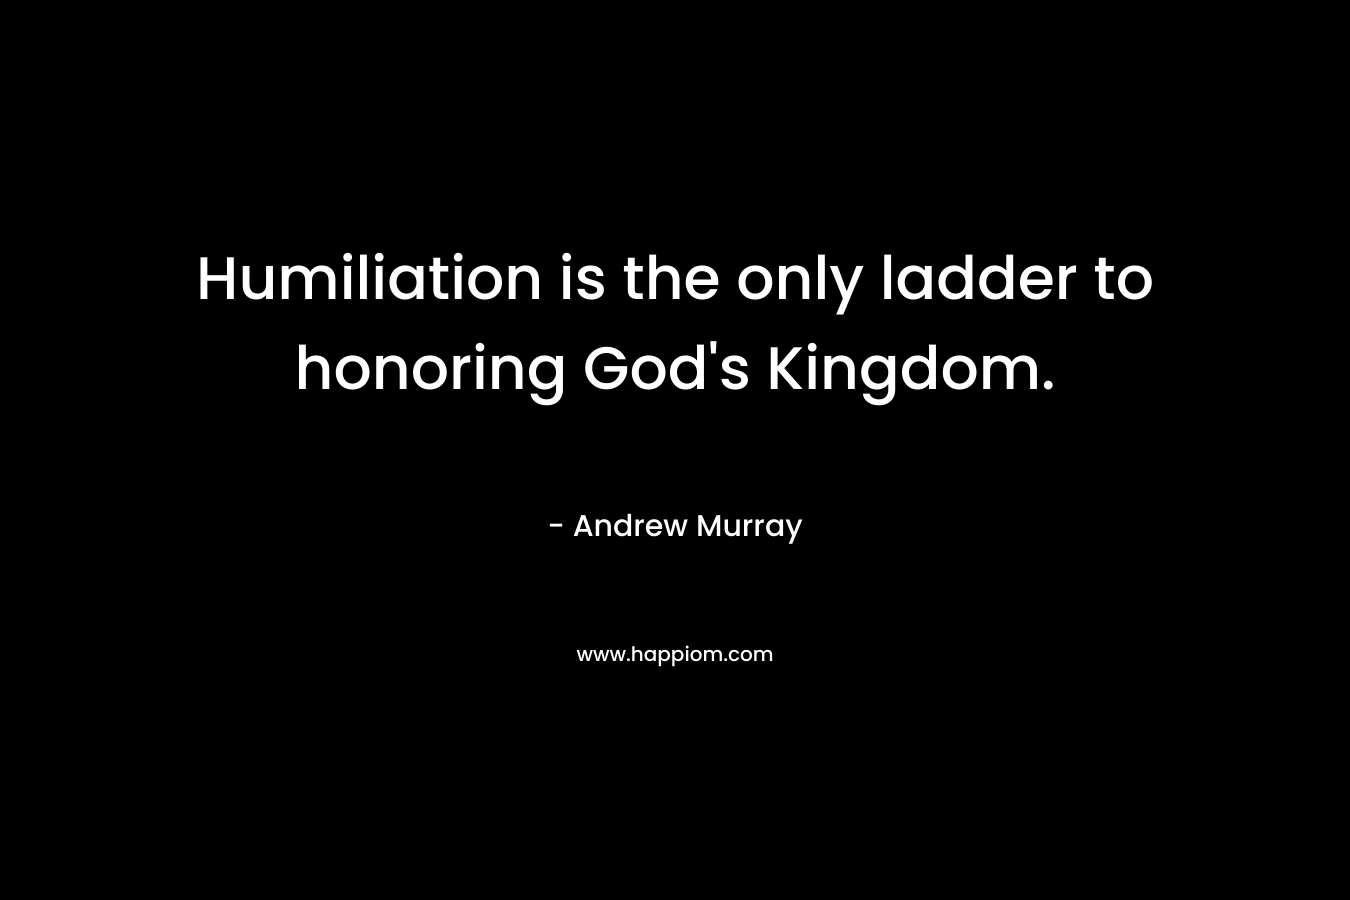 Humiliation is the only ladder to honoring God's Kingdom.